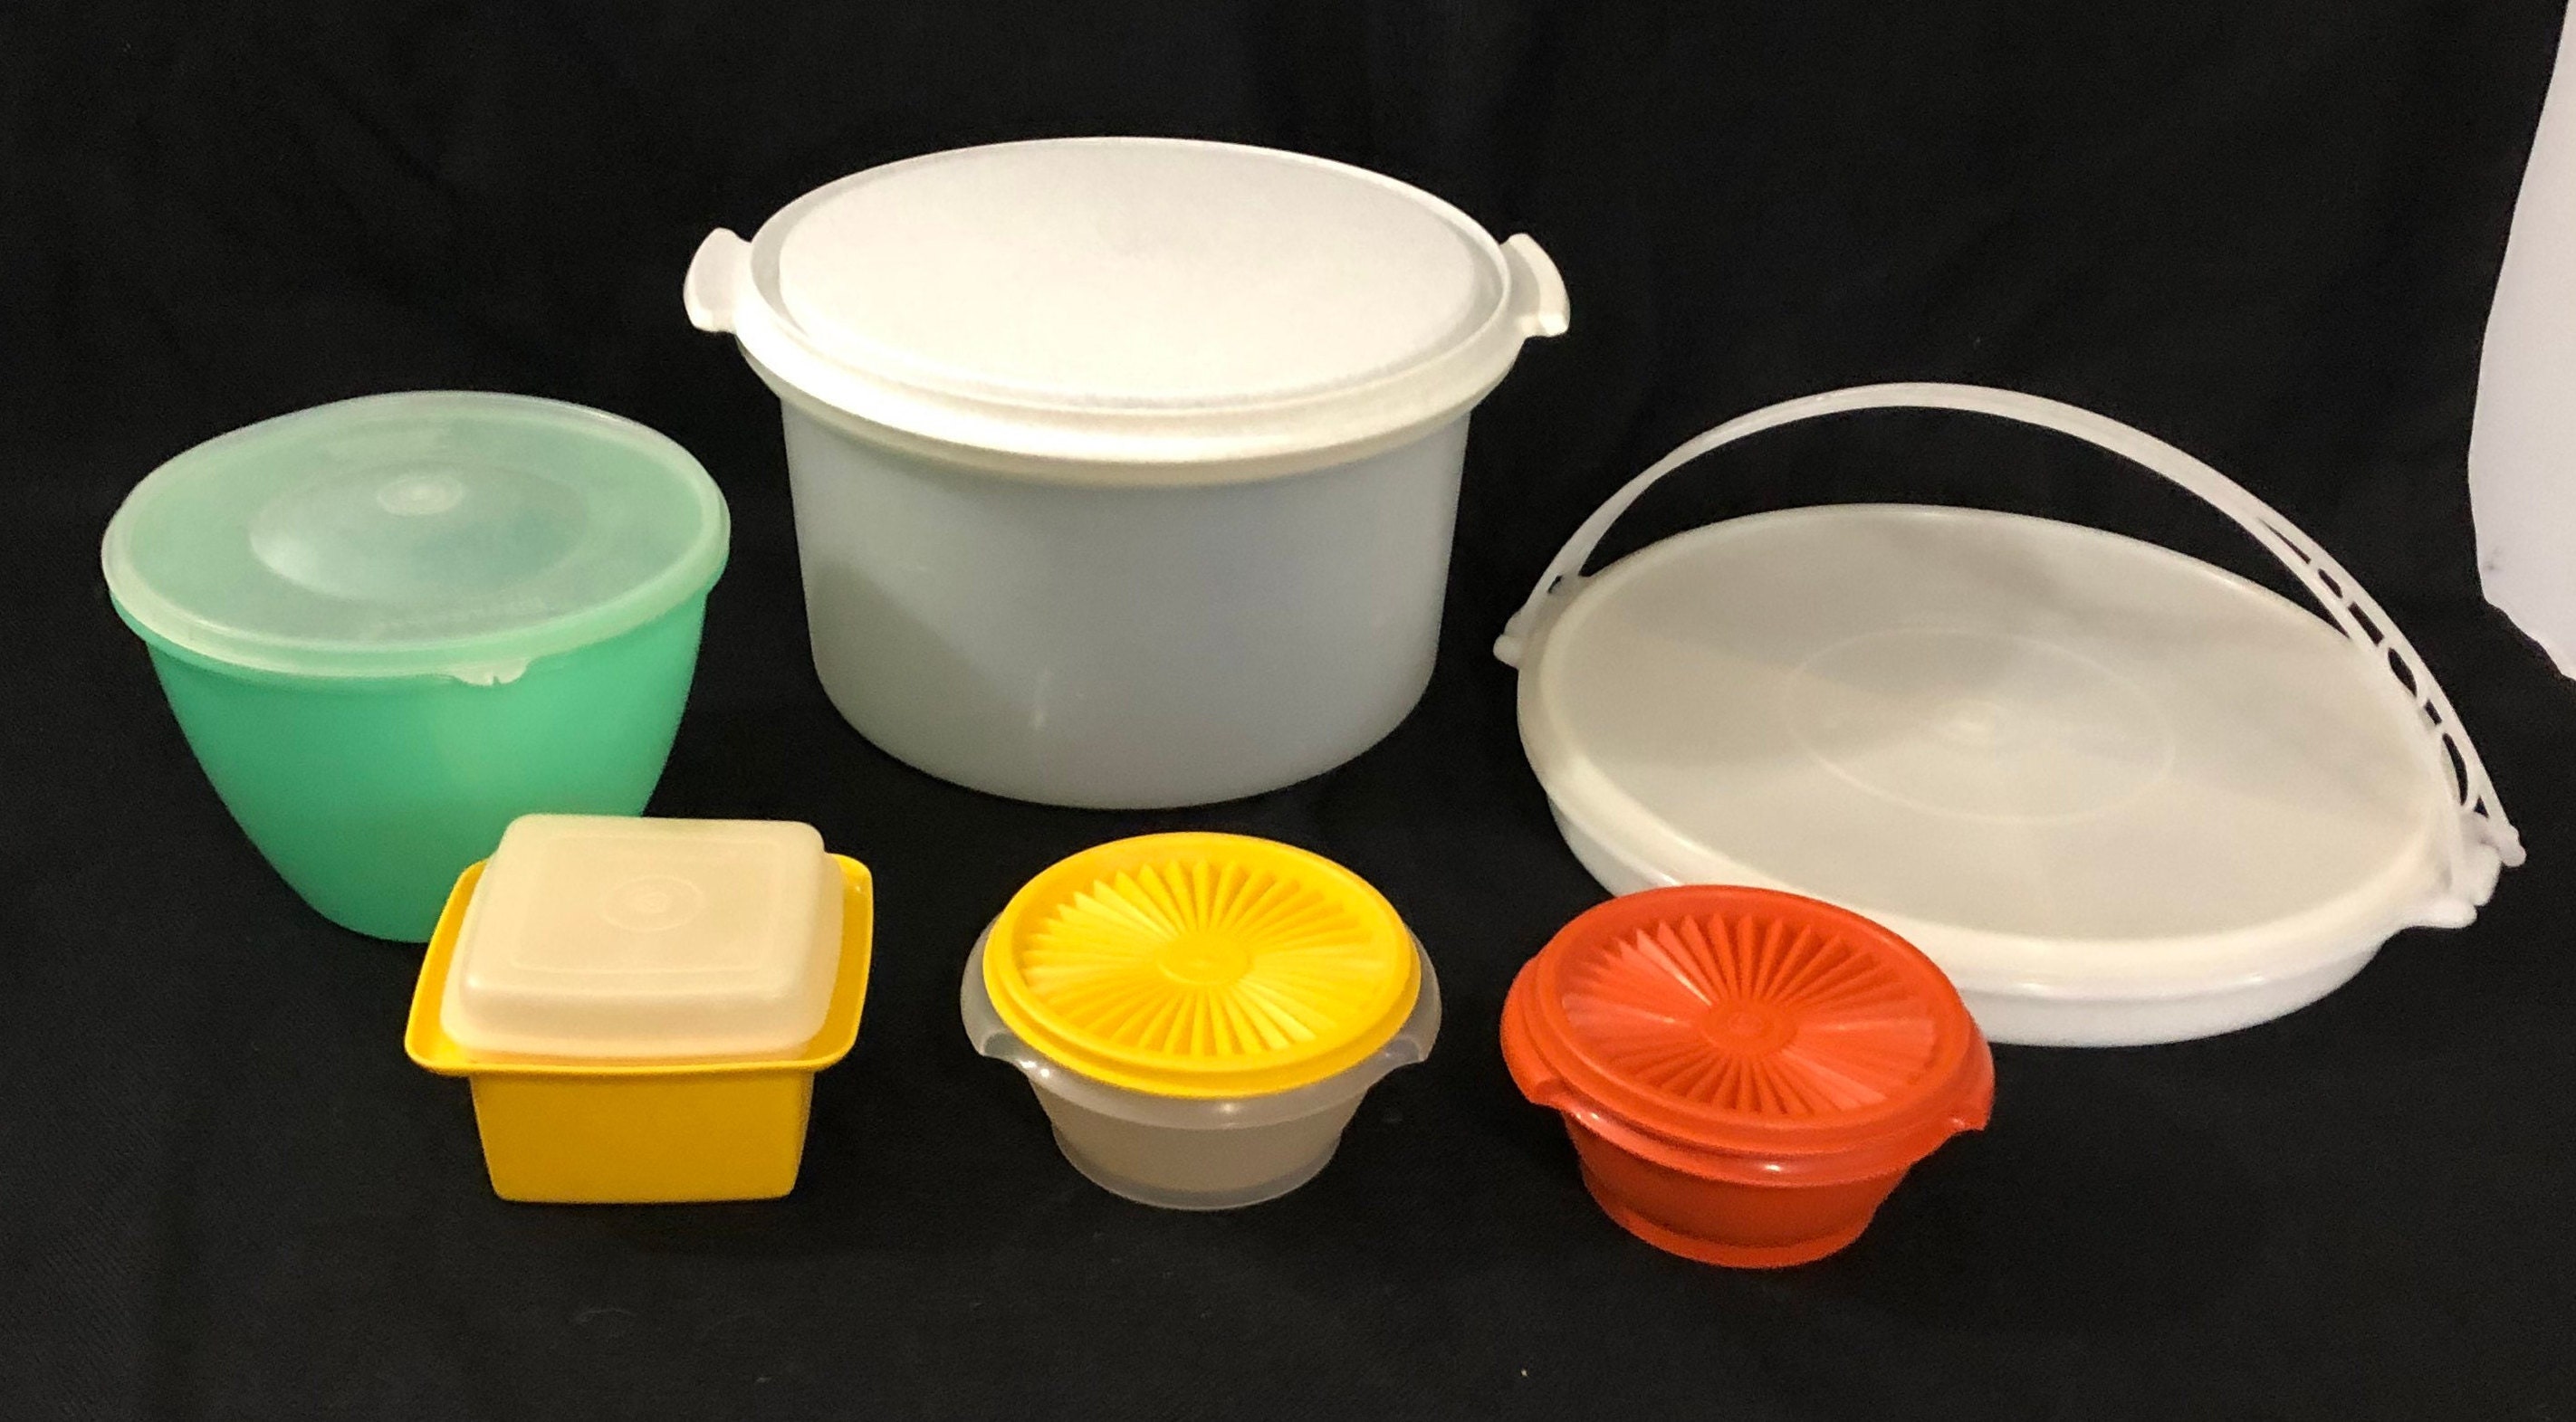 LOT OF 3 VINTAGE TUPPERWARE CEREAL CONTAINERS W/ LIDS 468-6, 469-5